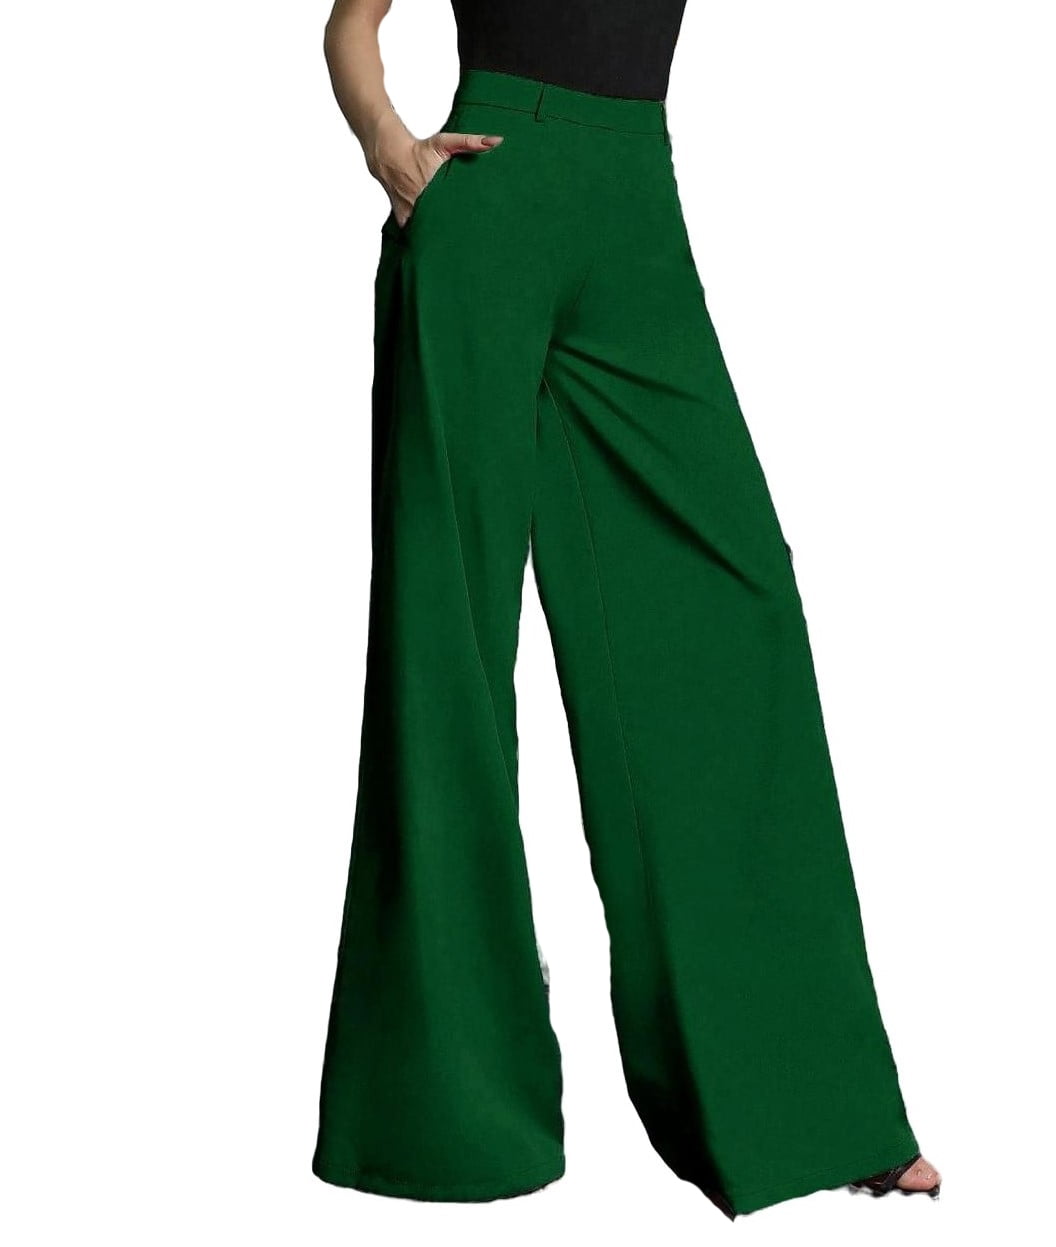 Dark Green Dress Pants with Dark Green Pants Outfits For Women (6 ideas &  outfits) | Lookastic